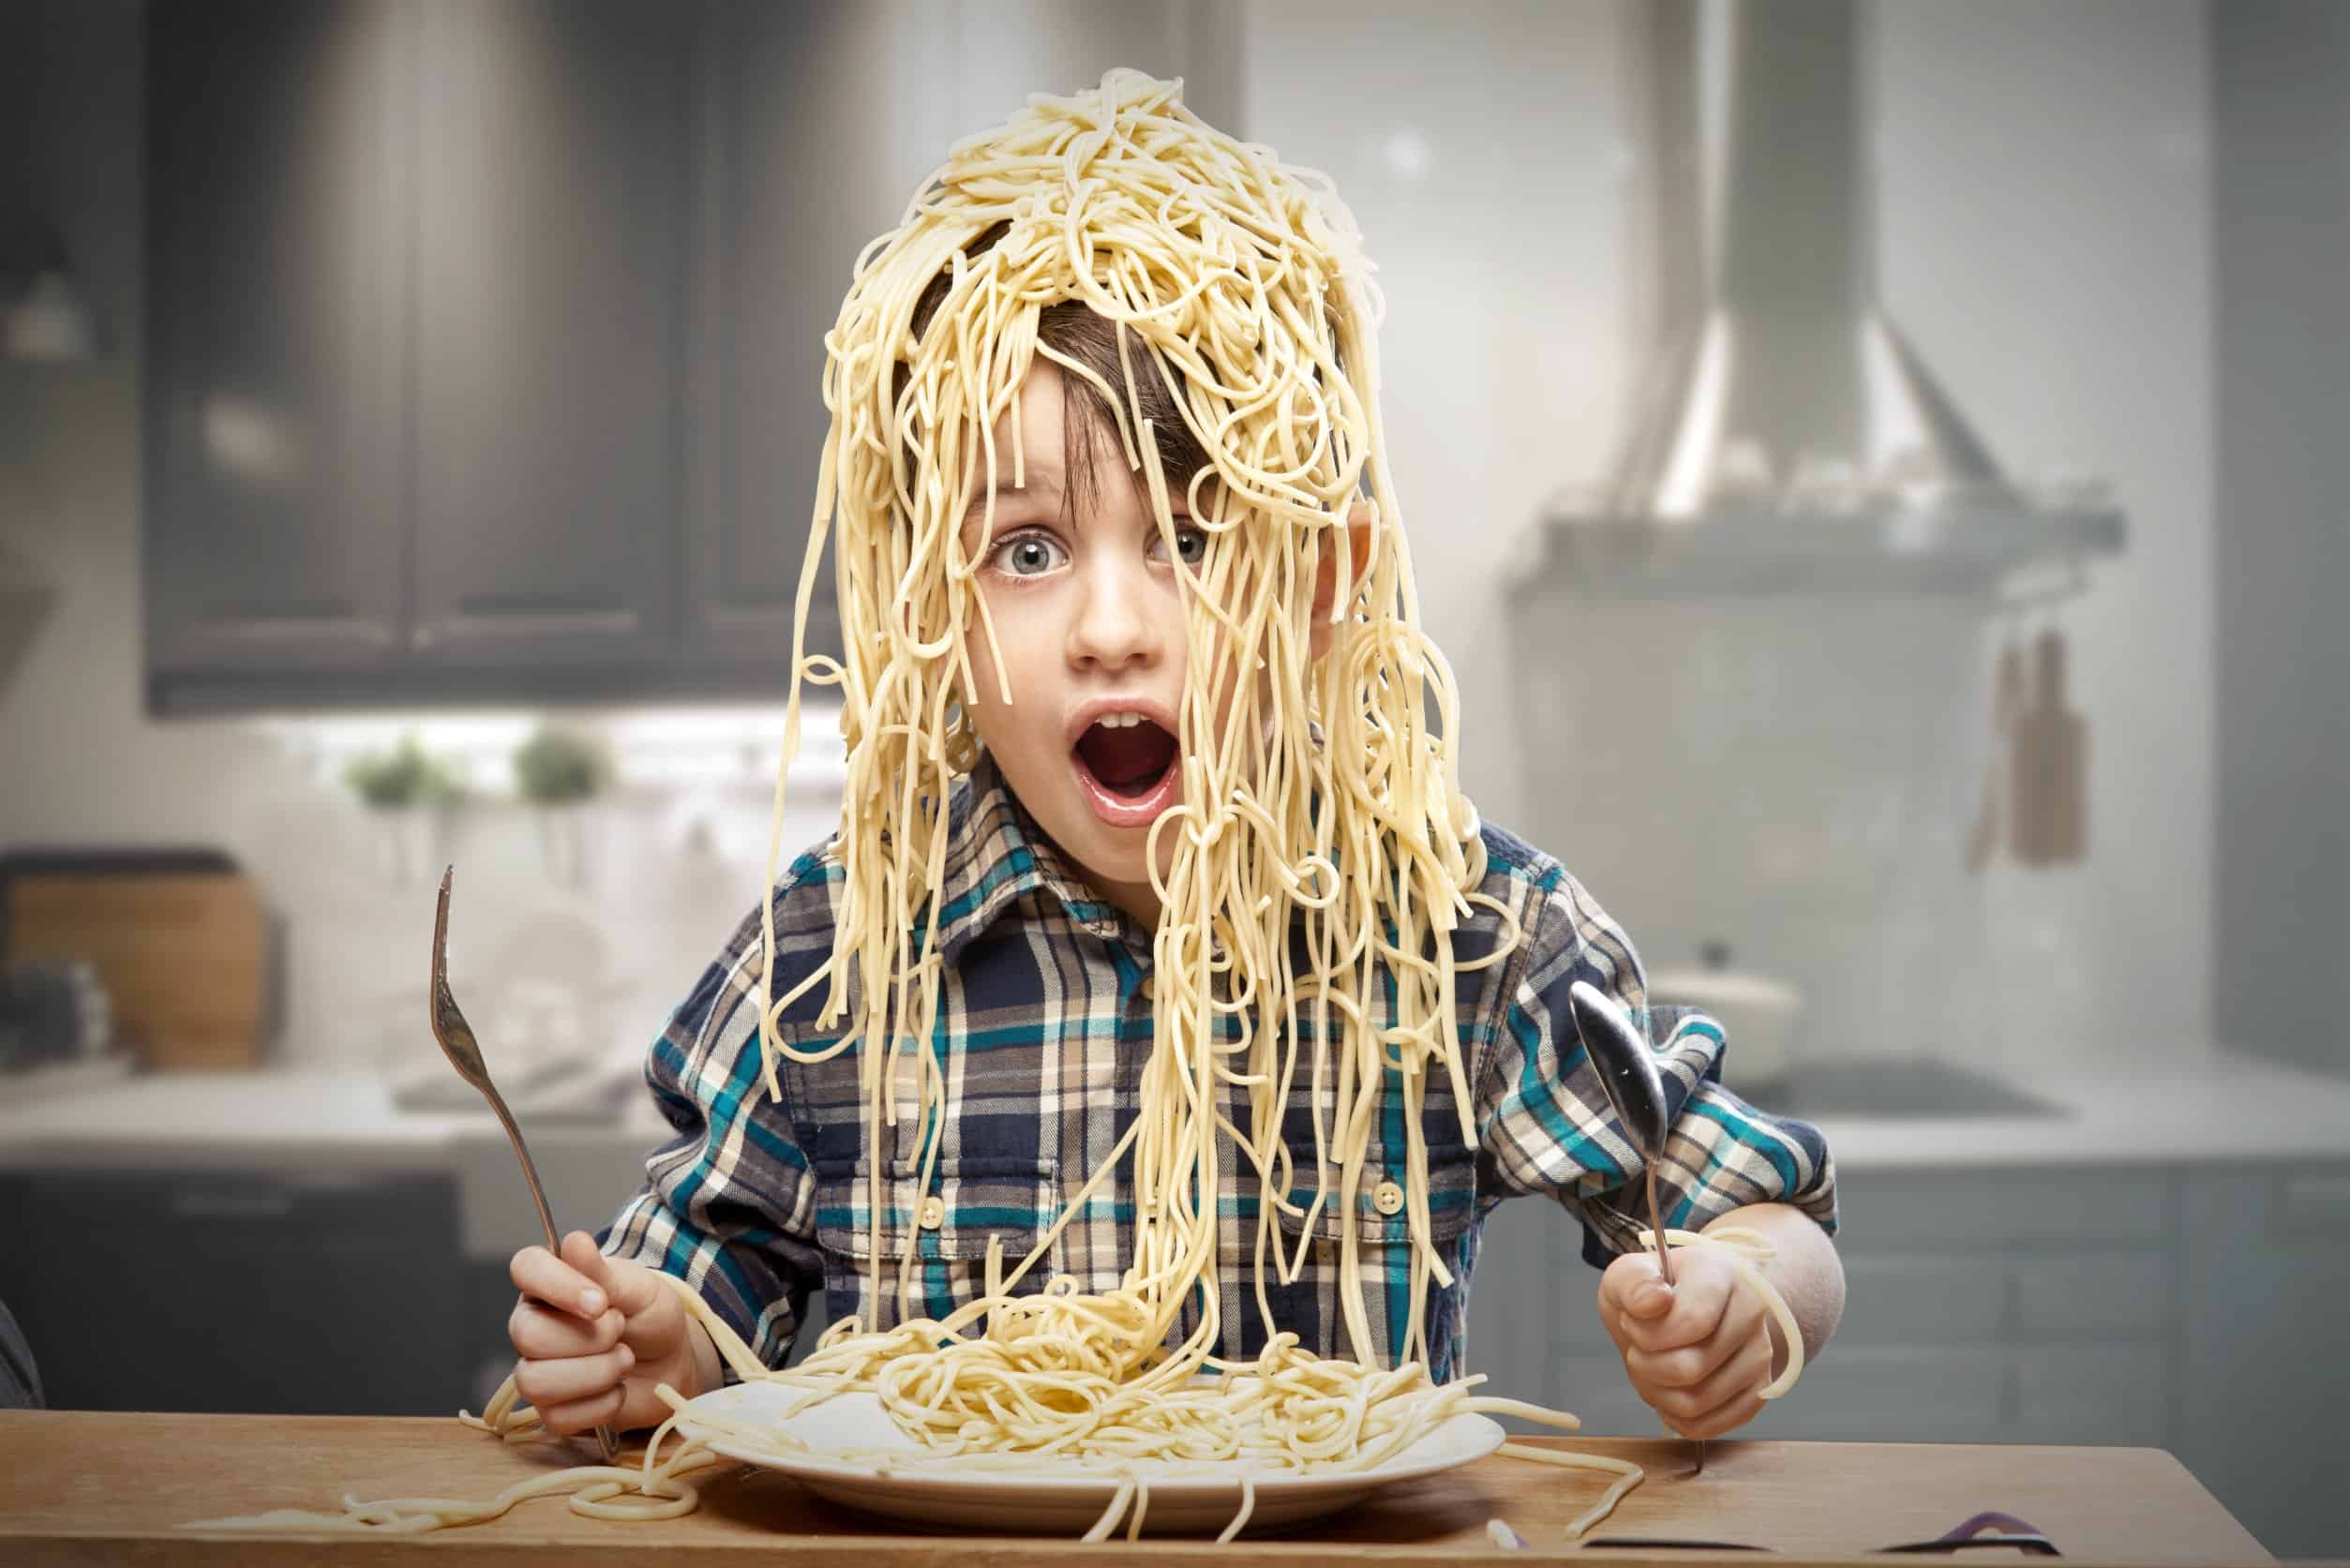 Young boy looking surprised with spaghetti tipped over his head